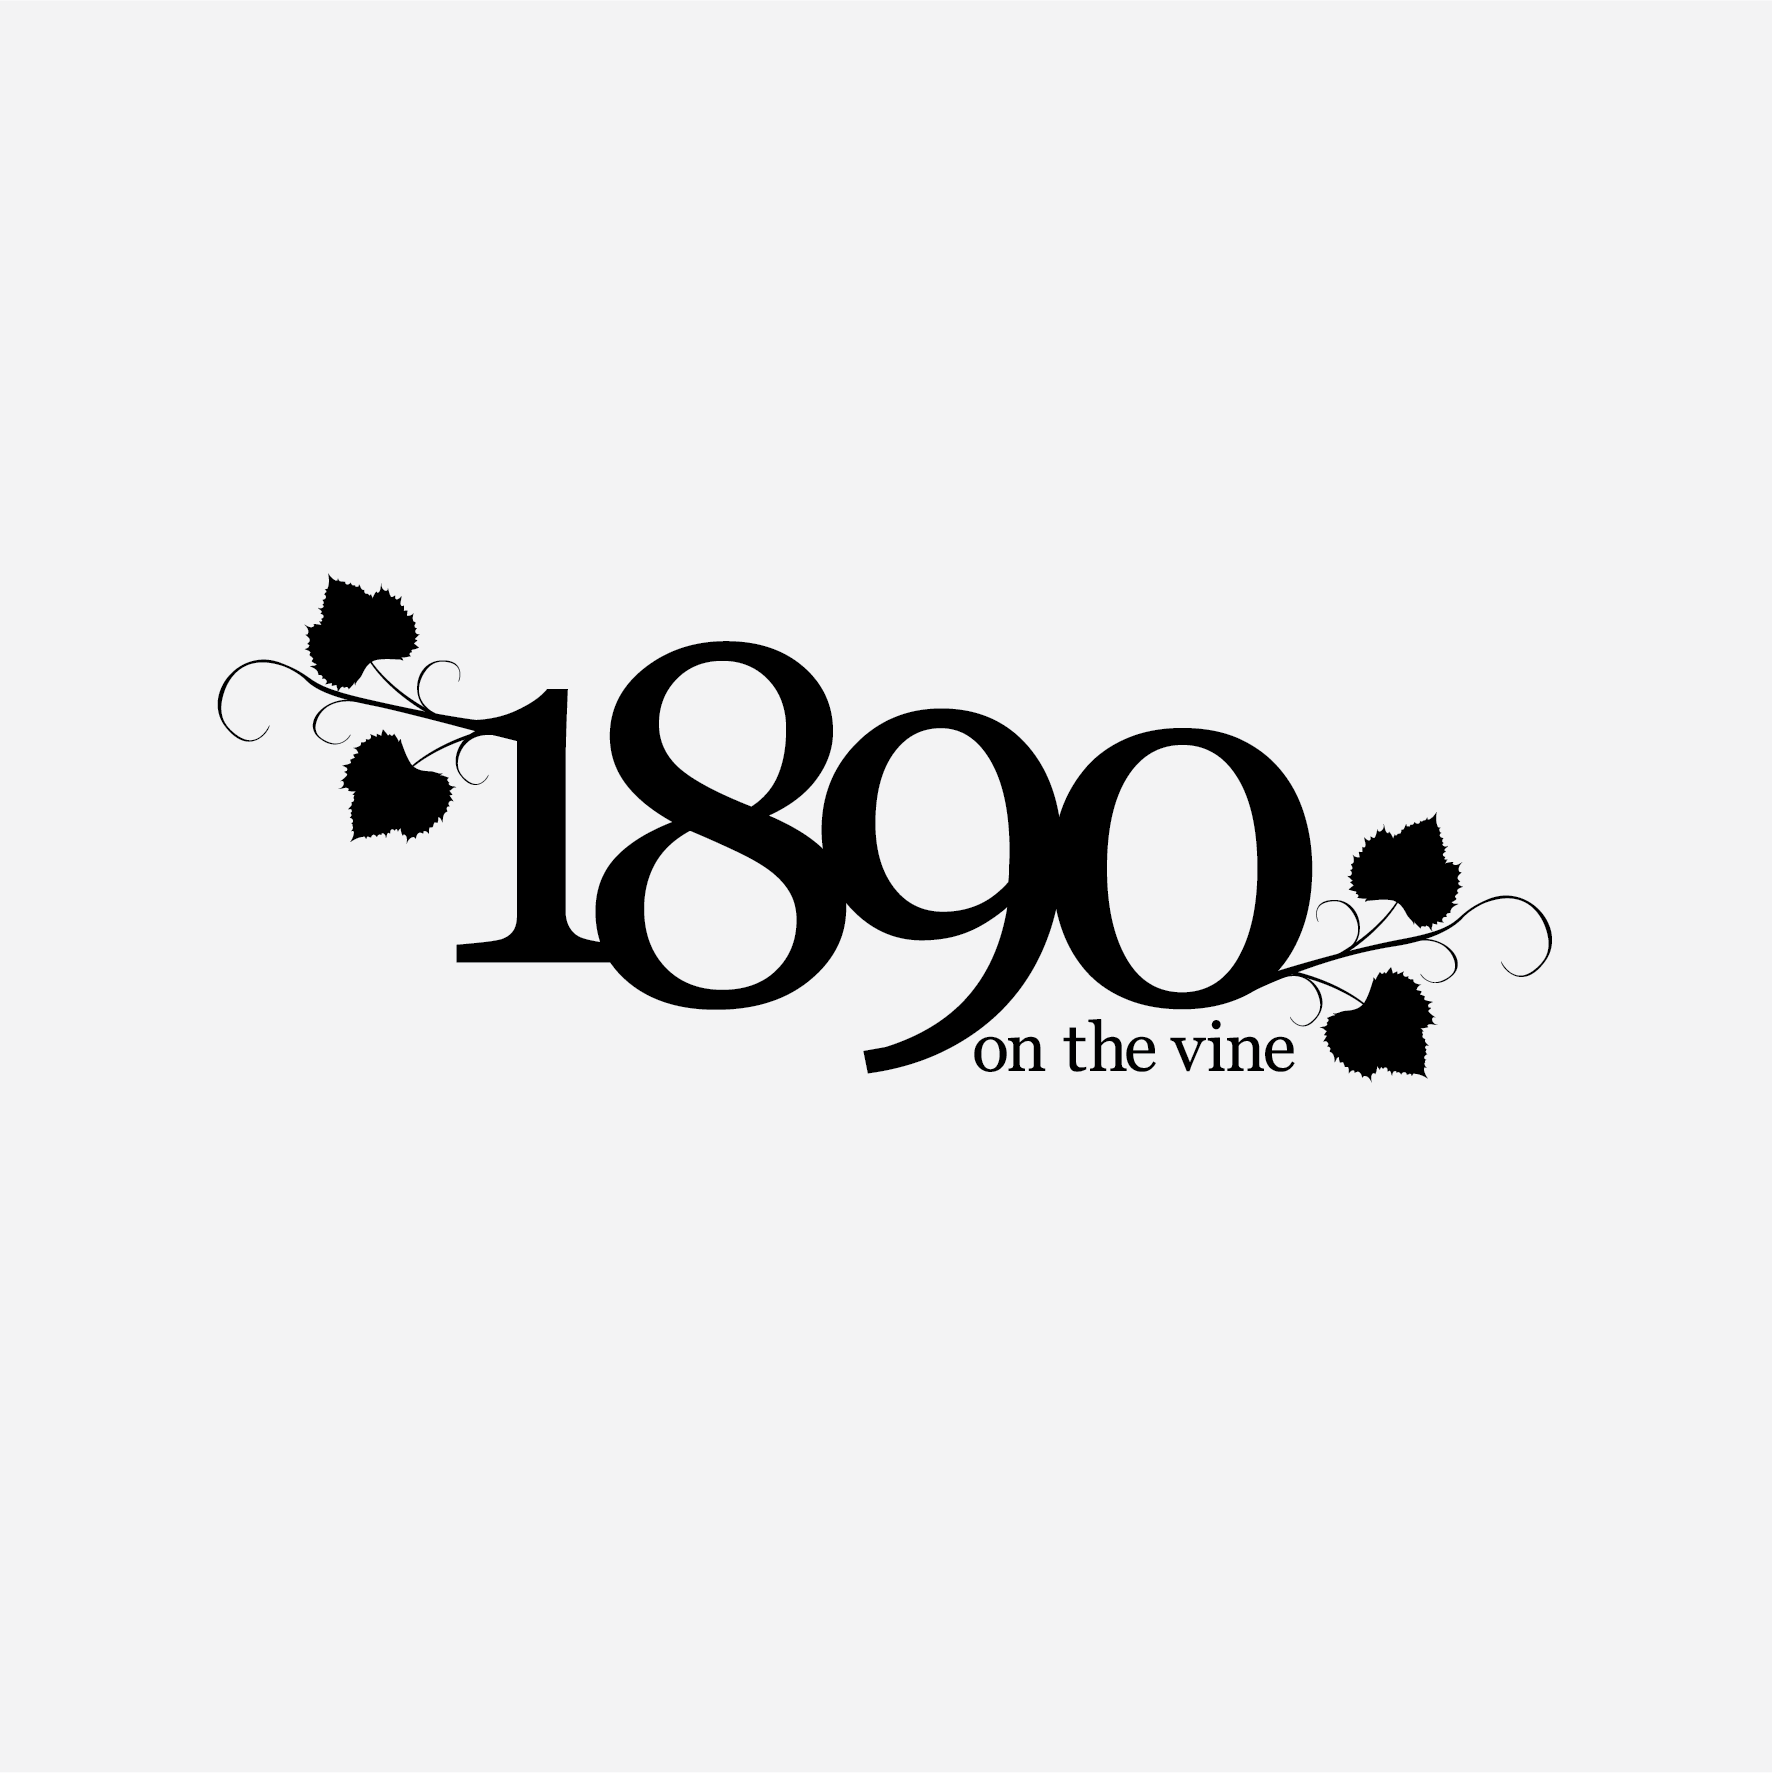 1890 on the vine Logo.png